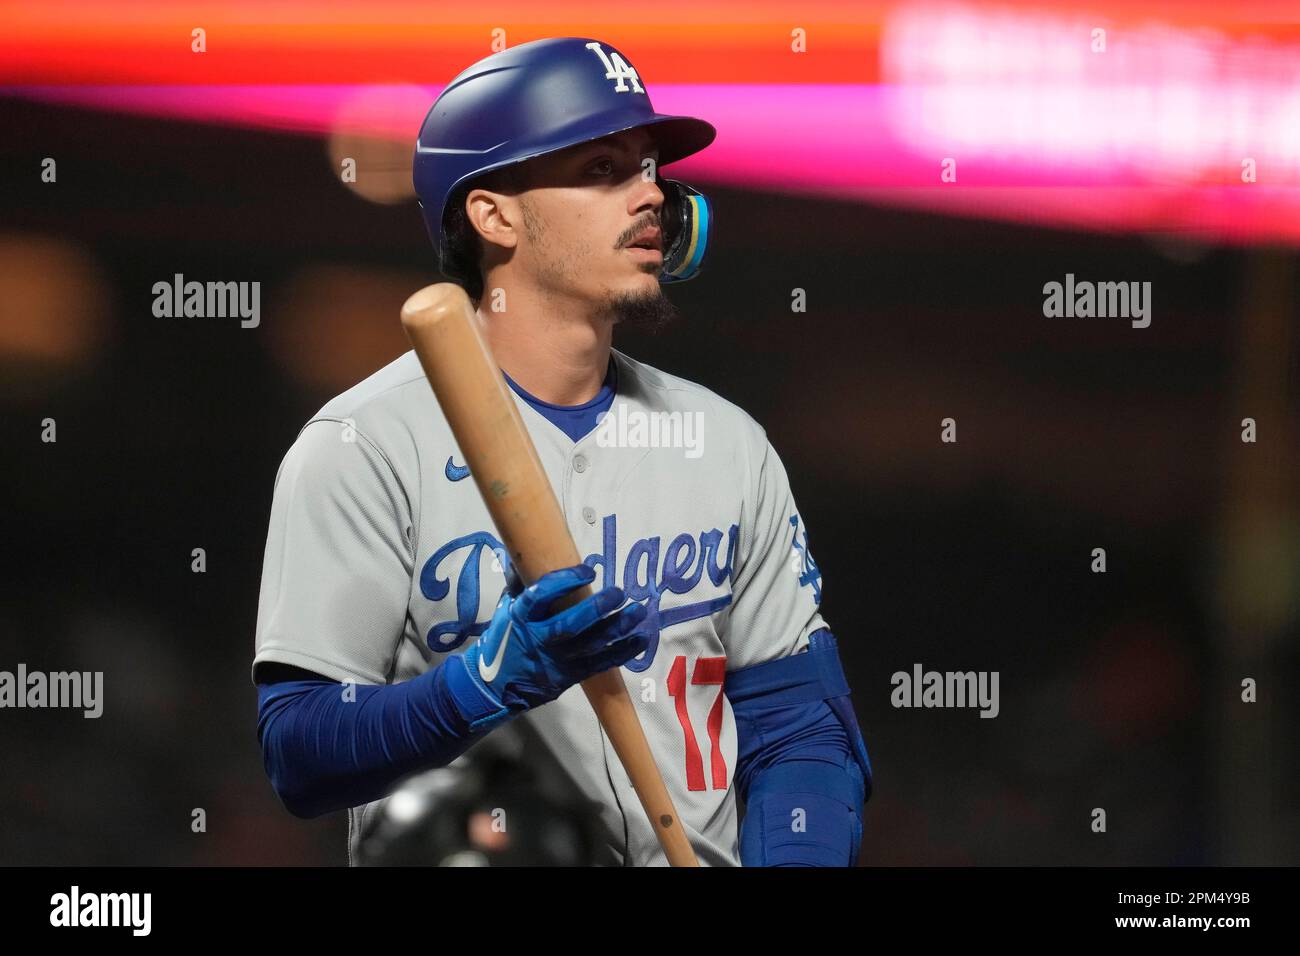 Los Angeles Dodgers' Miguel Vargas during a baseball game against